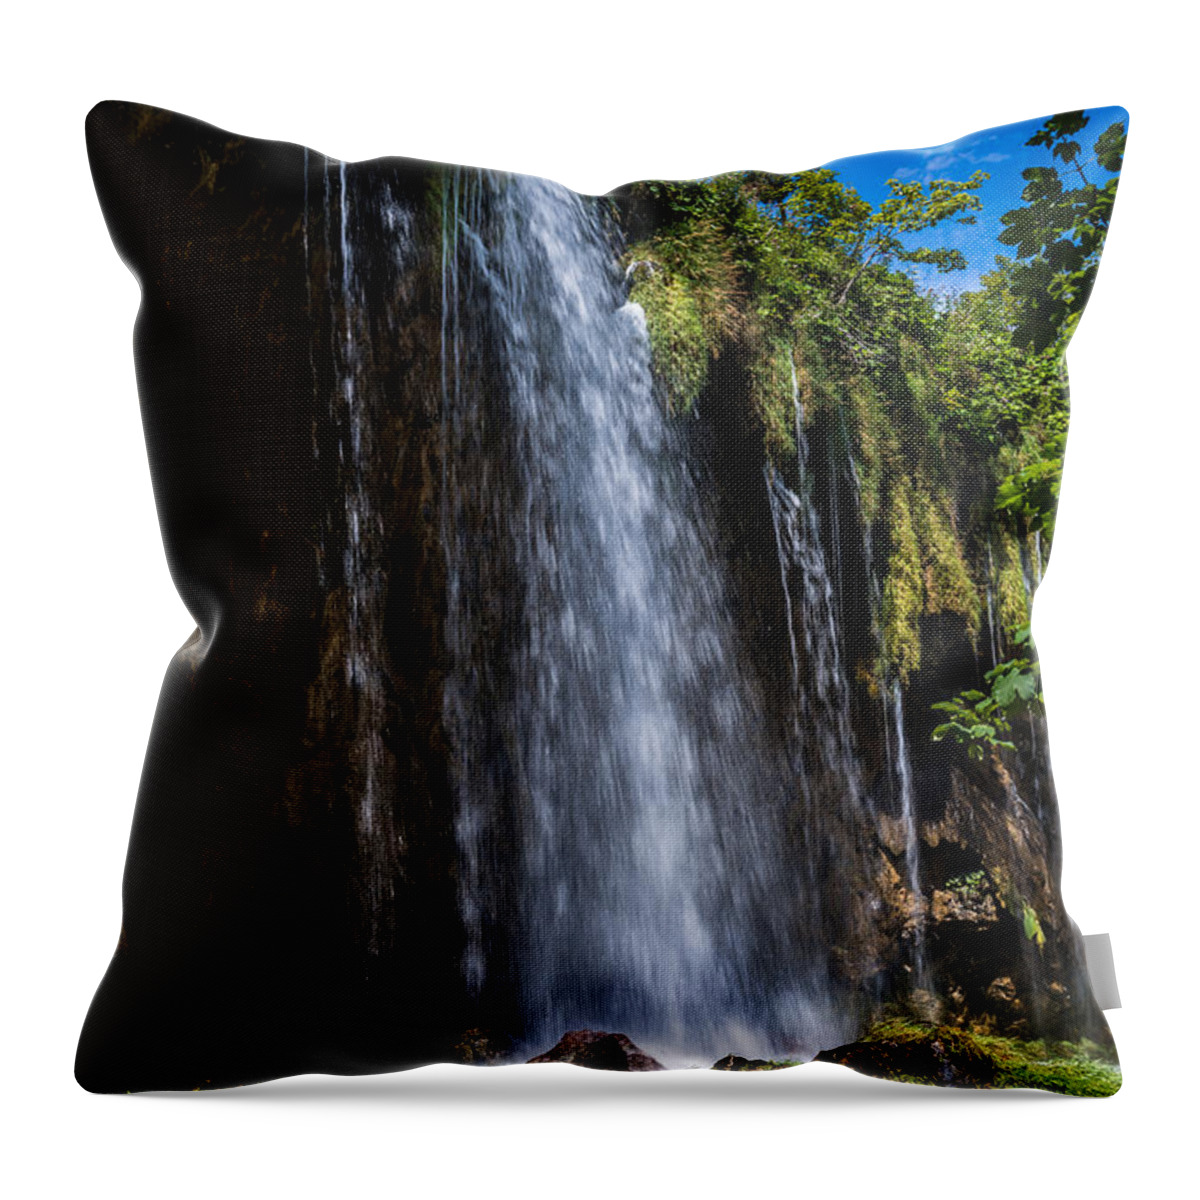 Croatia Throw Pillow featuring the photograph Nature's Shower by Hannes Cmarits